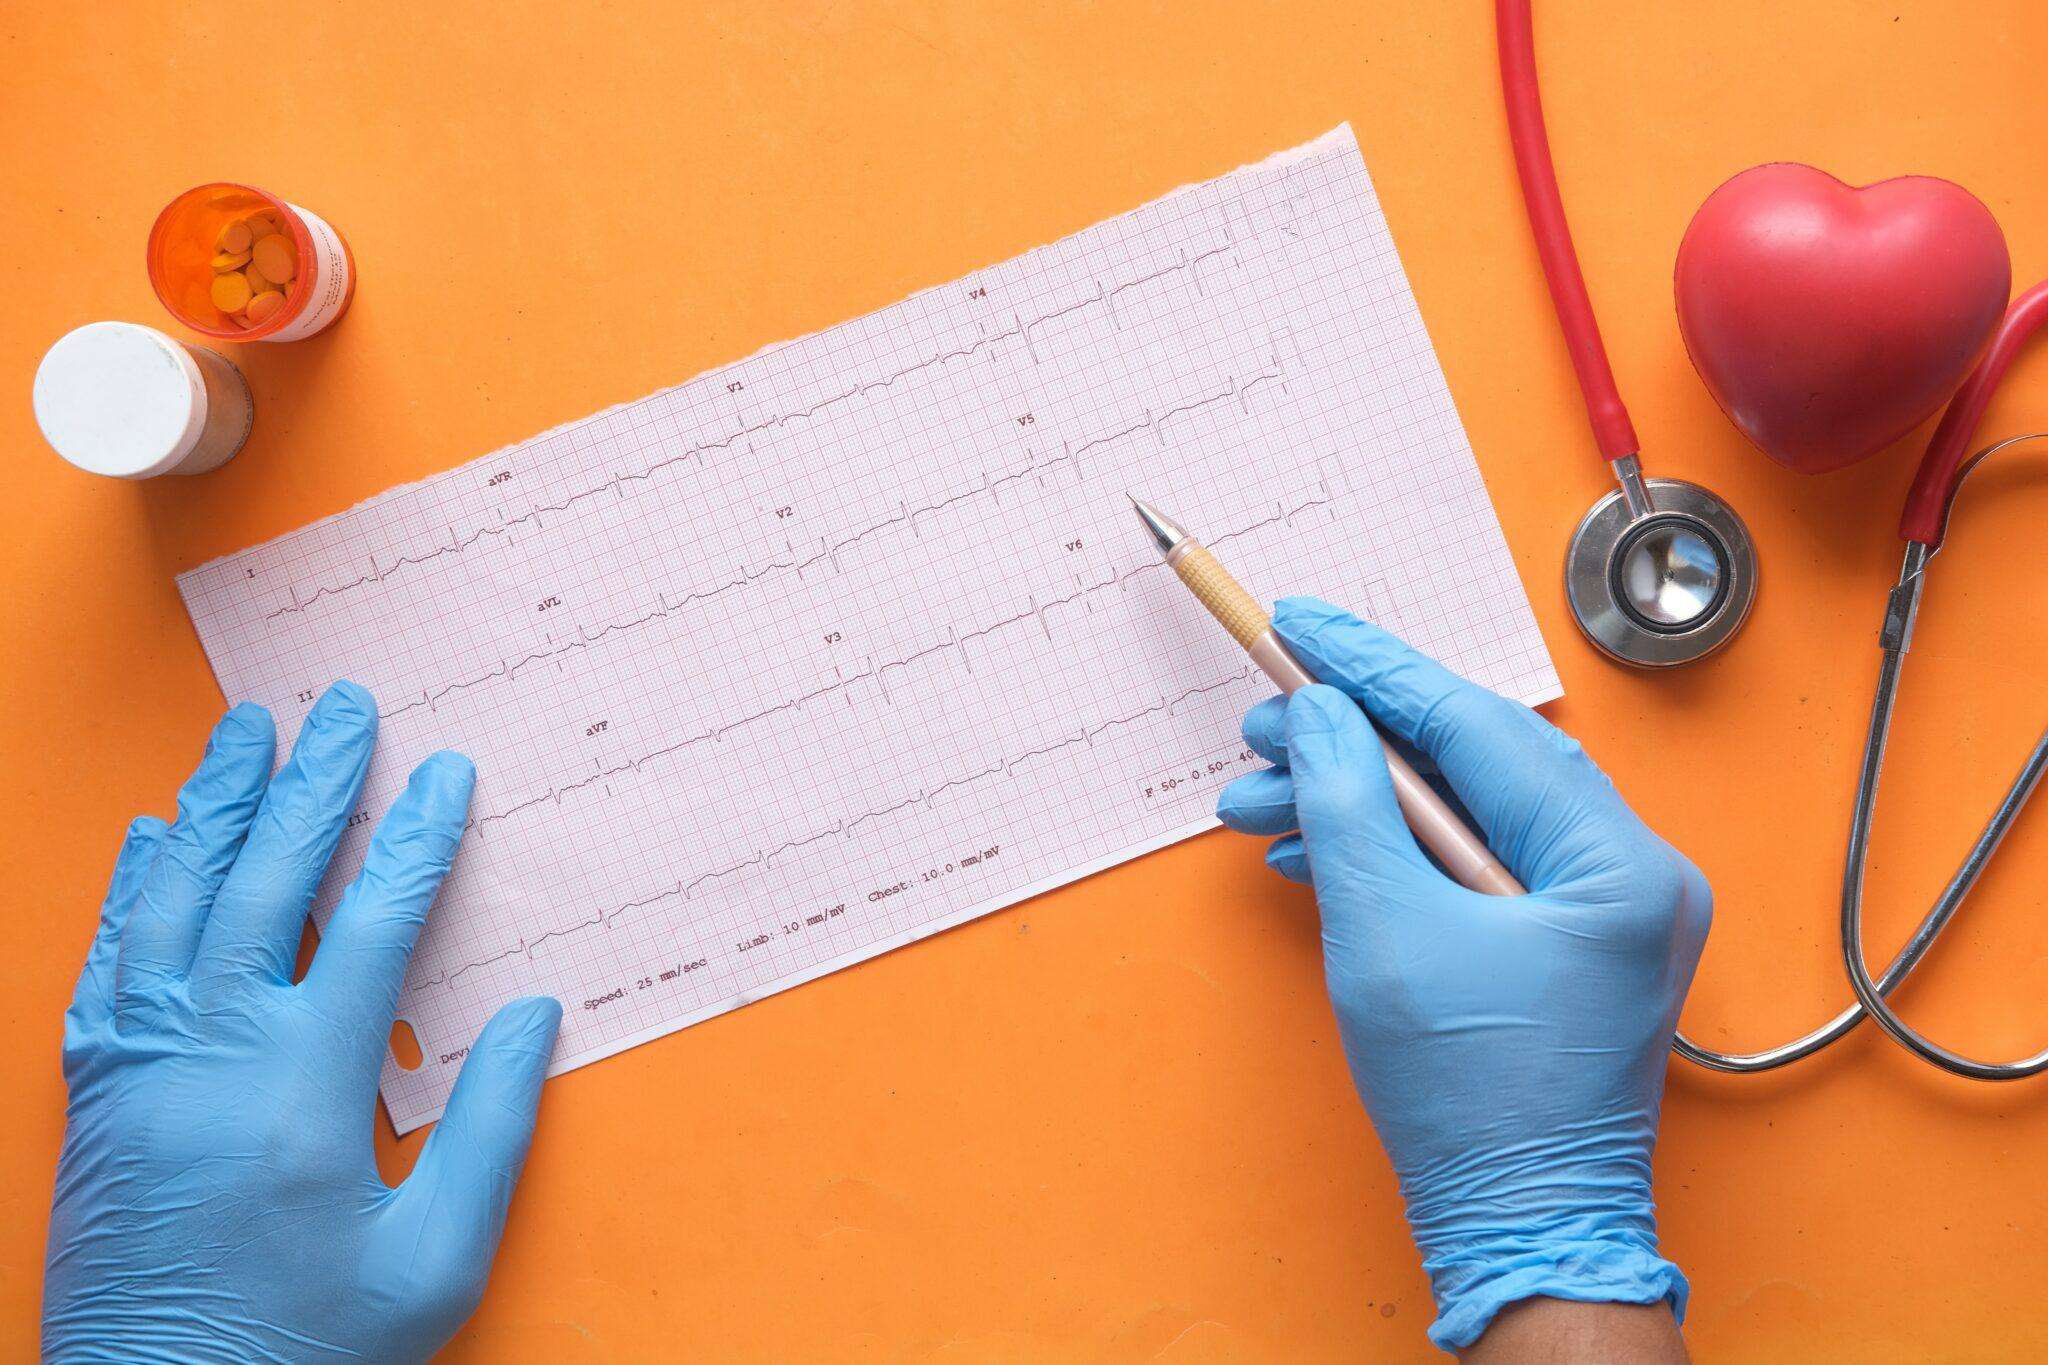 heartbeat monitor results with a person holding a pencil wearing blue medical gloves